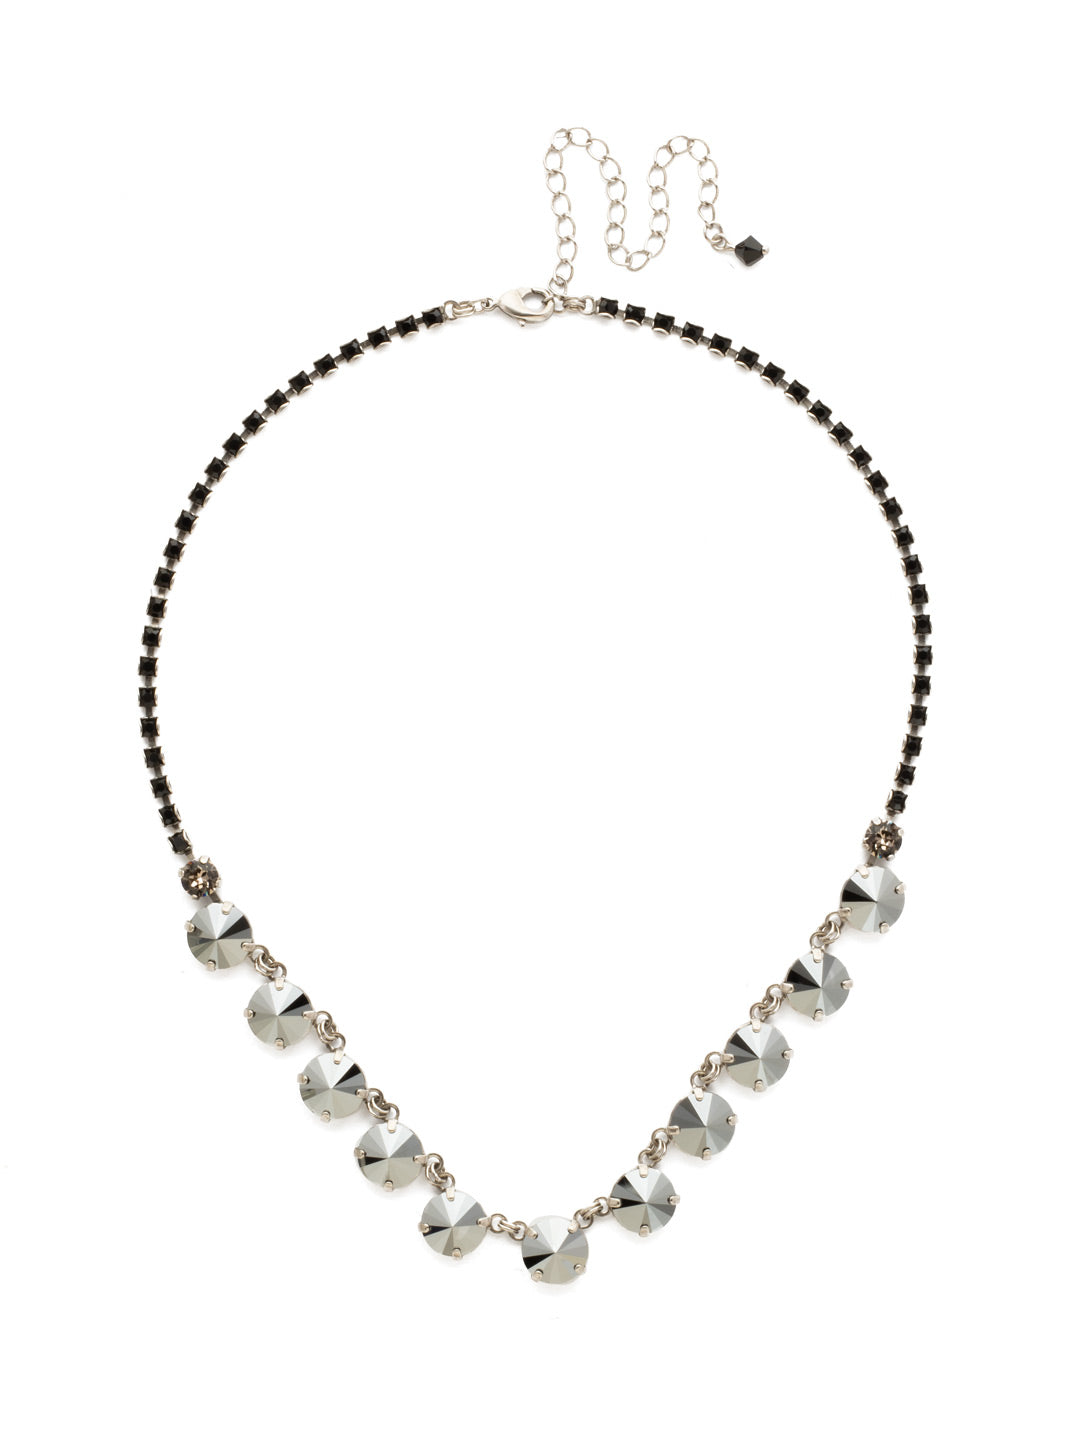 Simply Sophisticated Line Necklace - NDK6ASBON